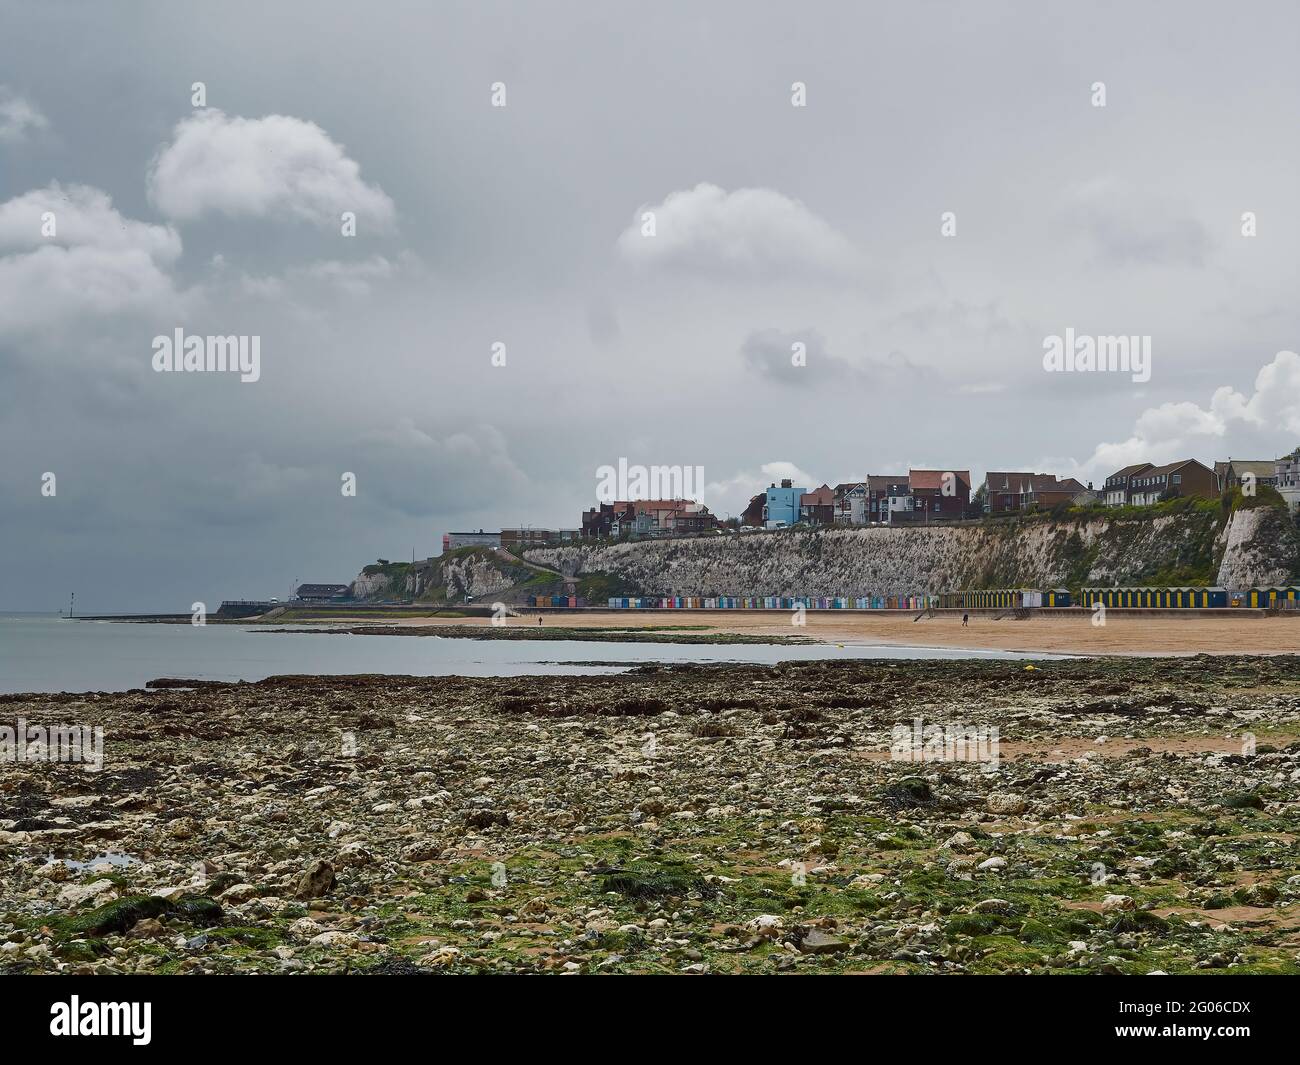 A muted view across Stone Bay’s beach, chalk cliffs and colourful beach huts, to the far headland, all under a heavy, oppressively clouded sky. Stock Photo